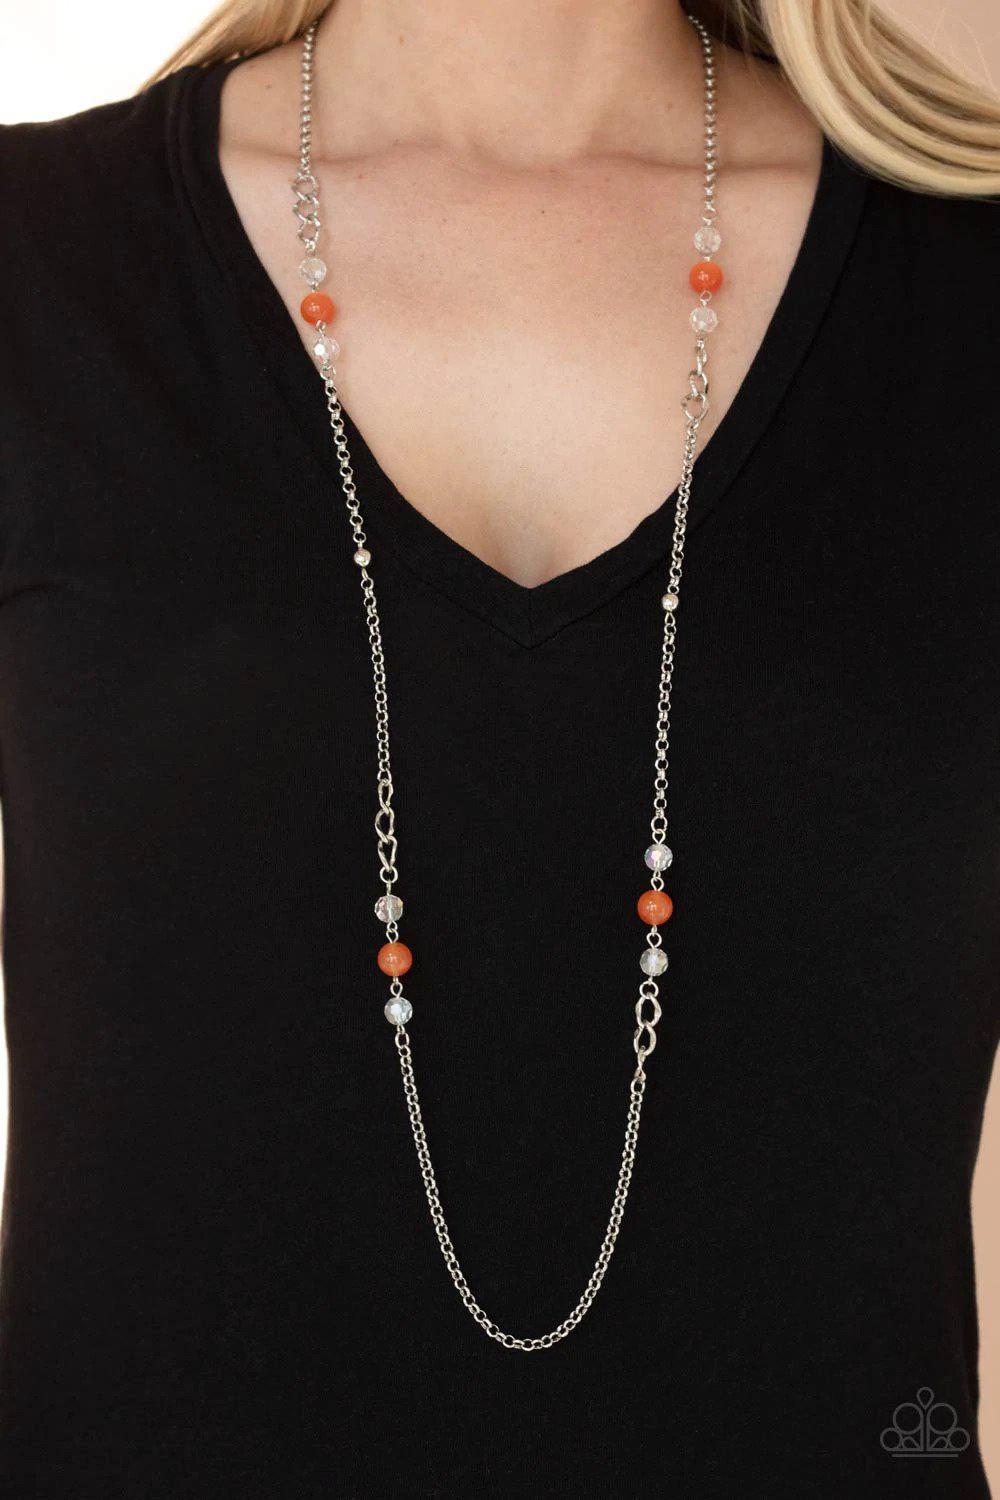 Teasingly Trendy Orange Necklace - Paparazzi Accessories- on model - CarasShop.com - $5 Jewelry by Cara Jewels